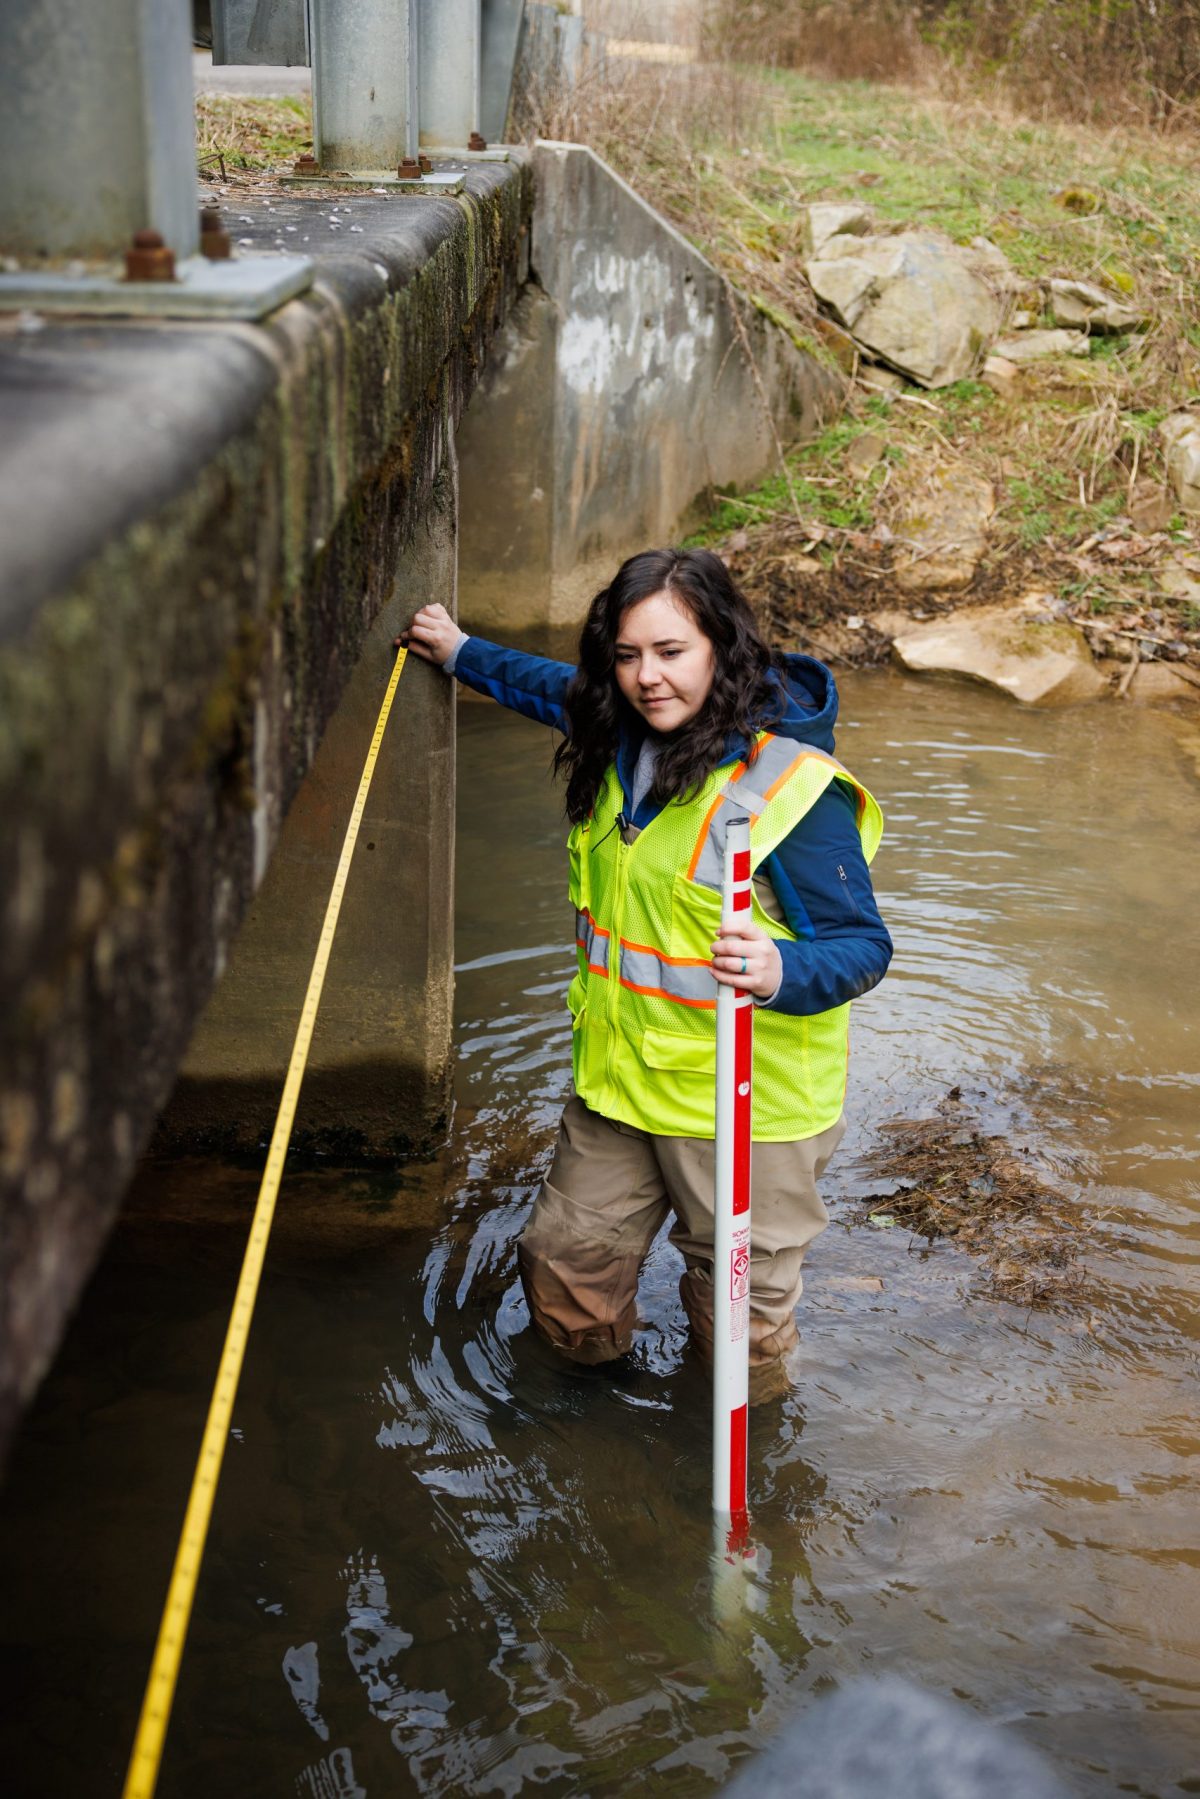 Reintroduction Biologist Sarah Kate Bailey measures a culvert while working on a conservation project to identify and replace culverts that restrict the passage of fish.